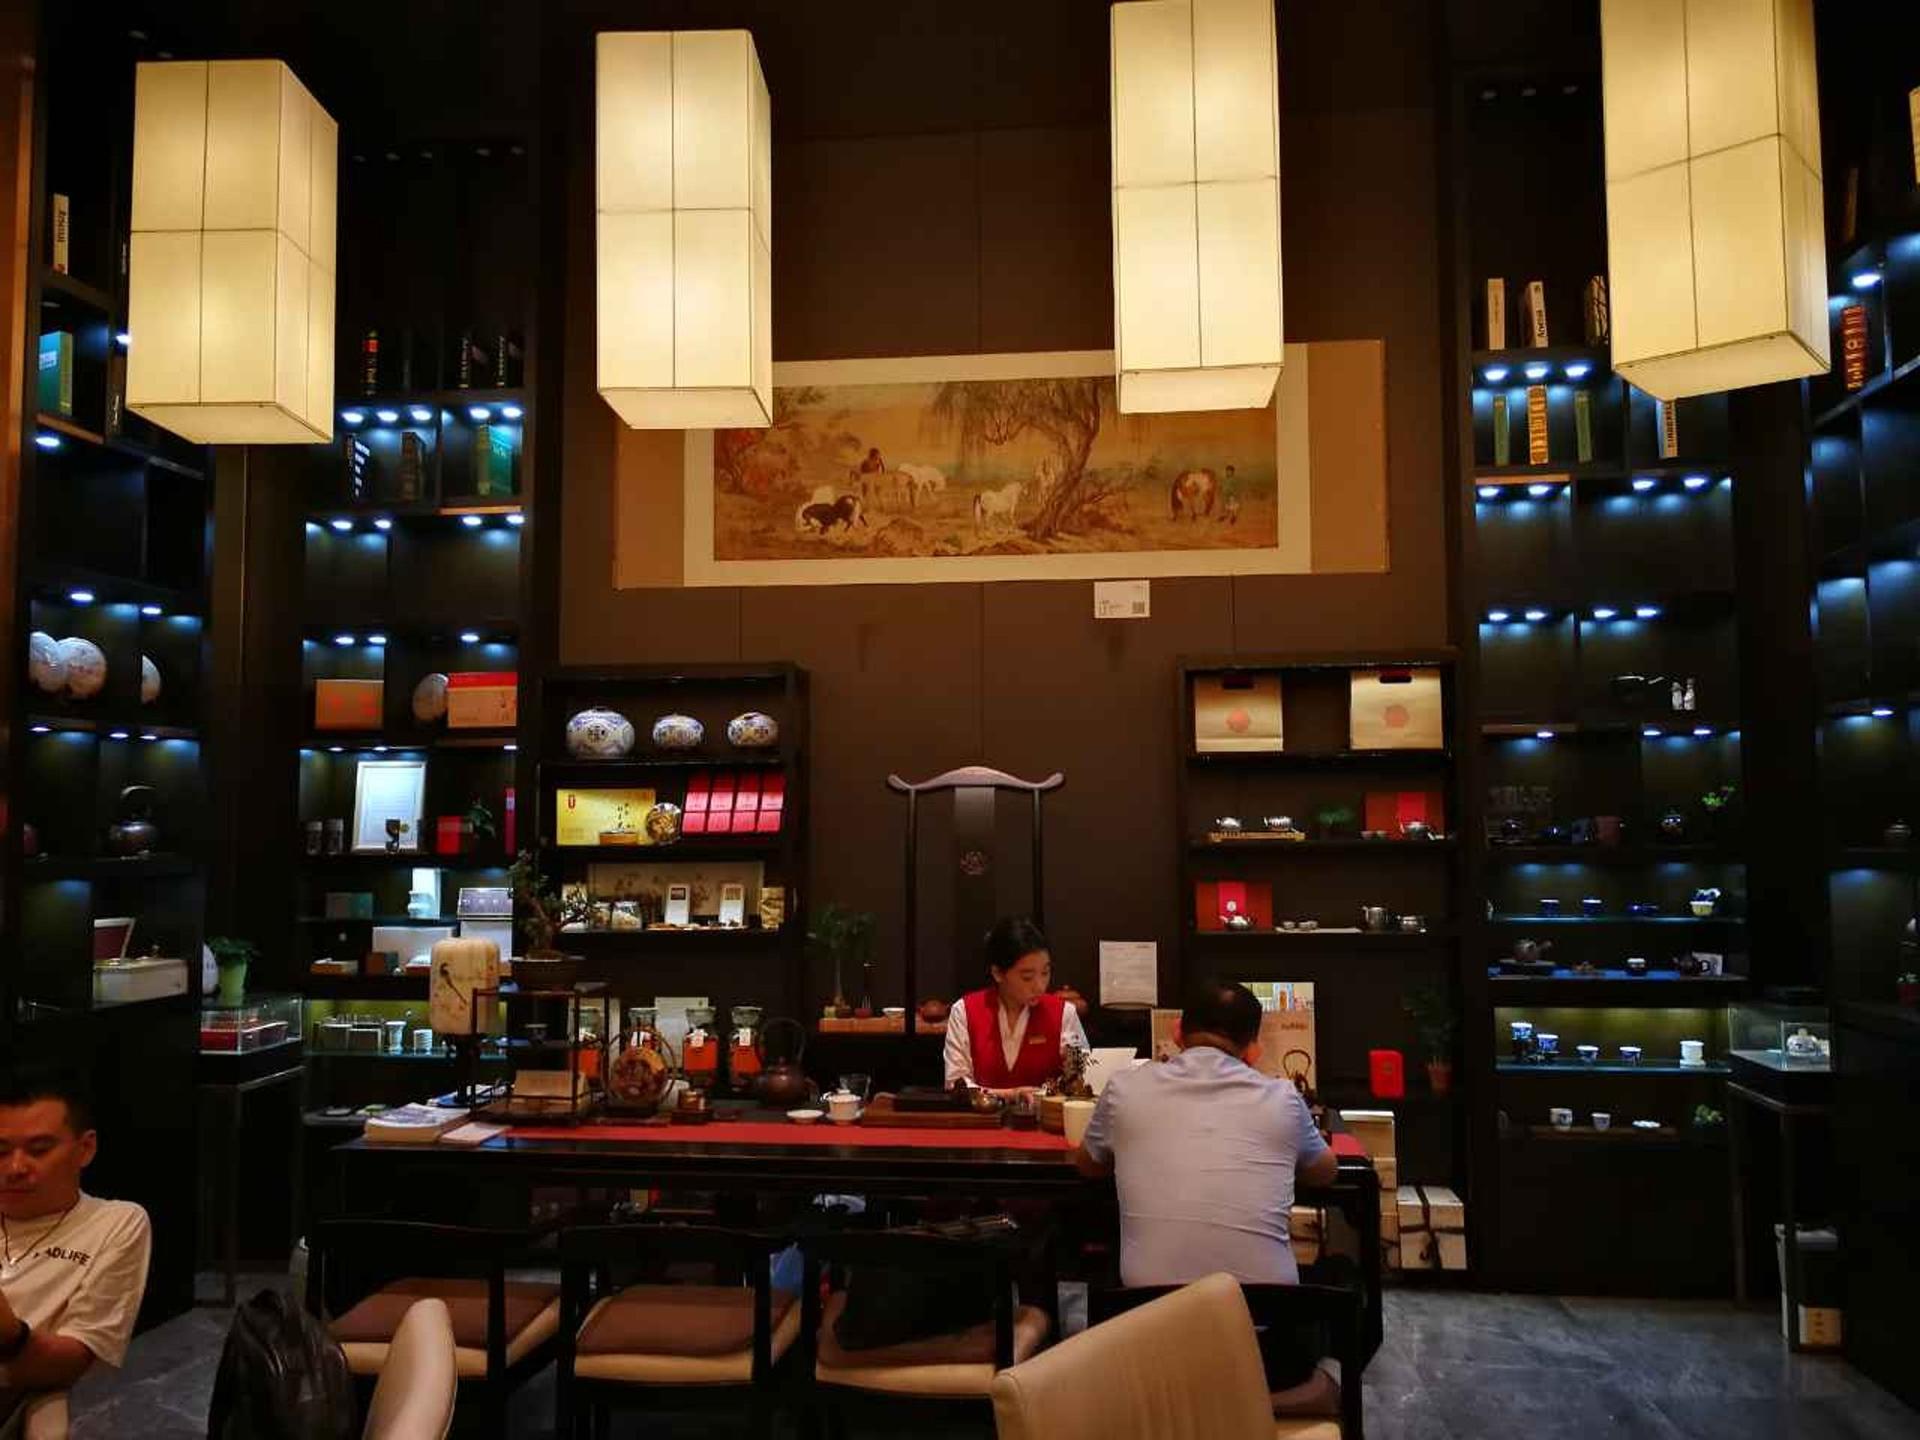 Shenzhen Airlines King Lounge image 1 of 2